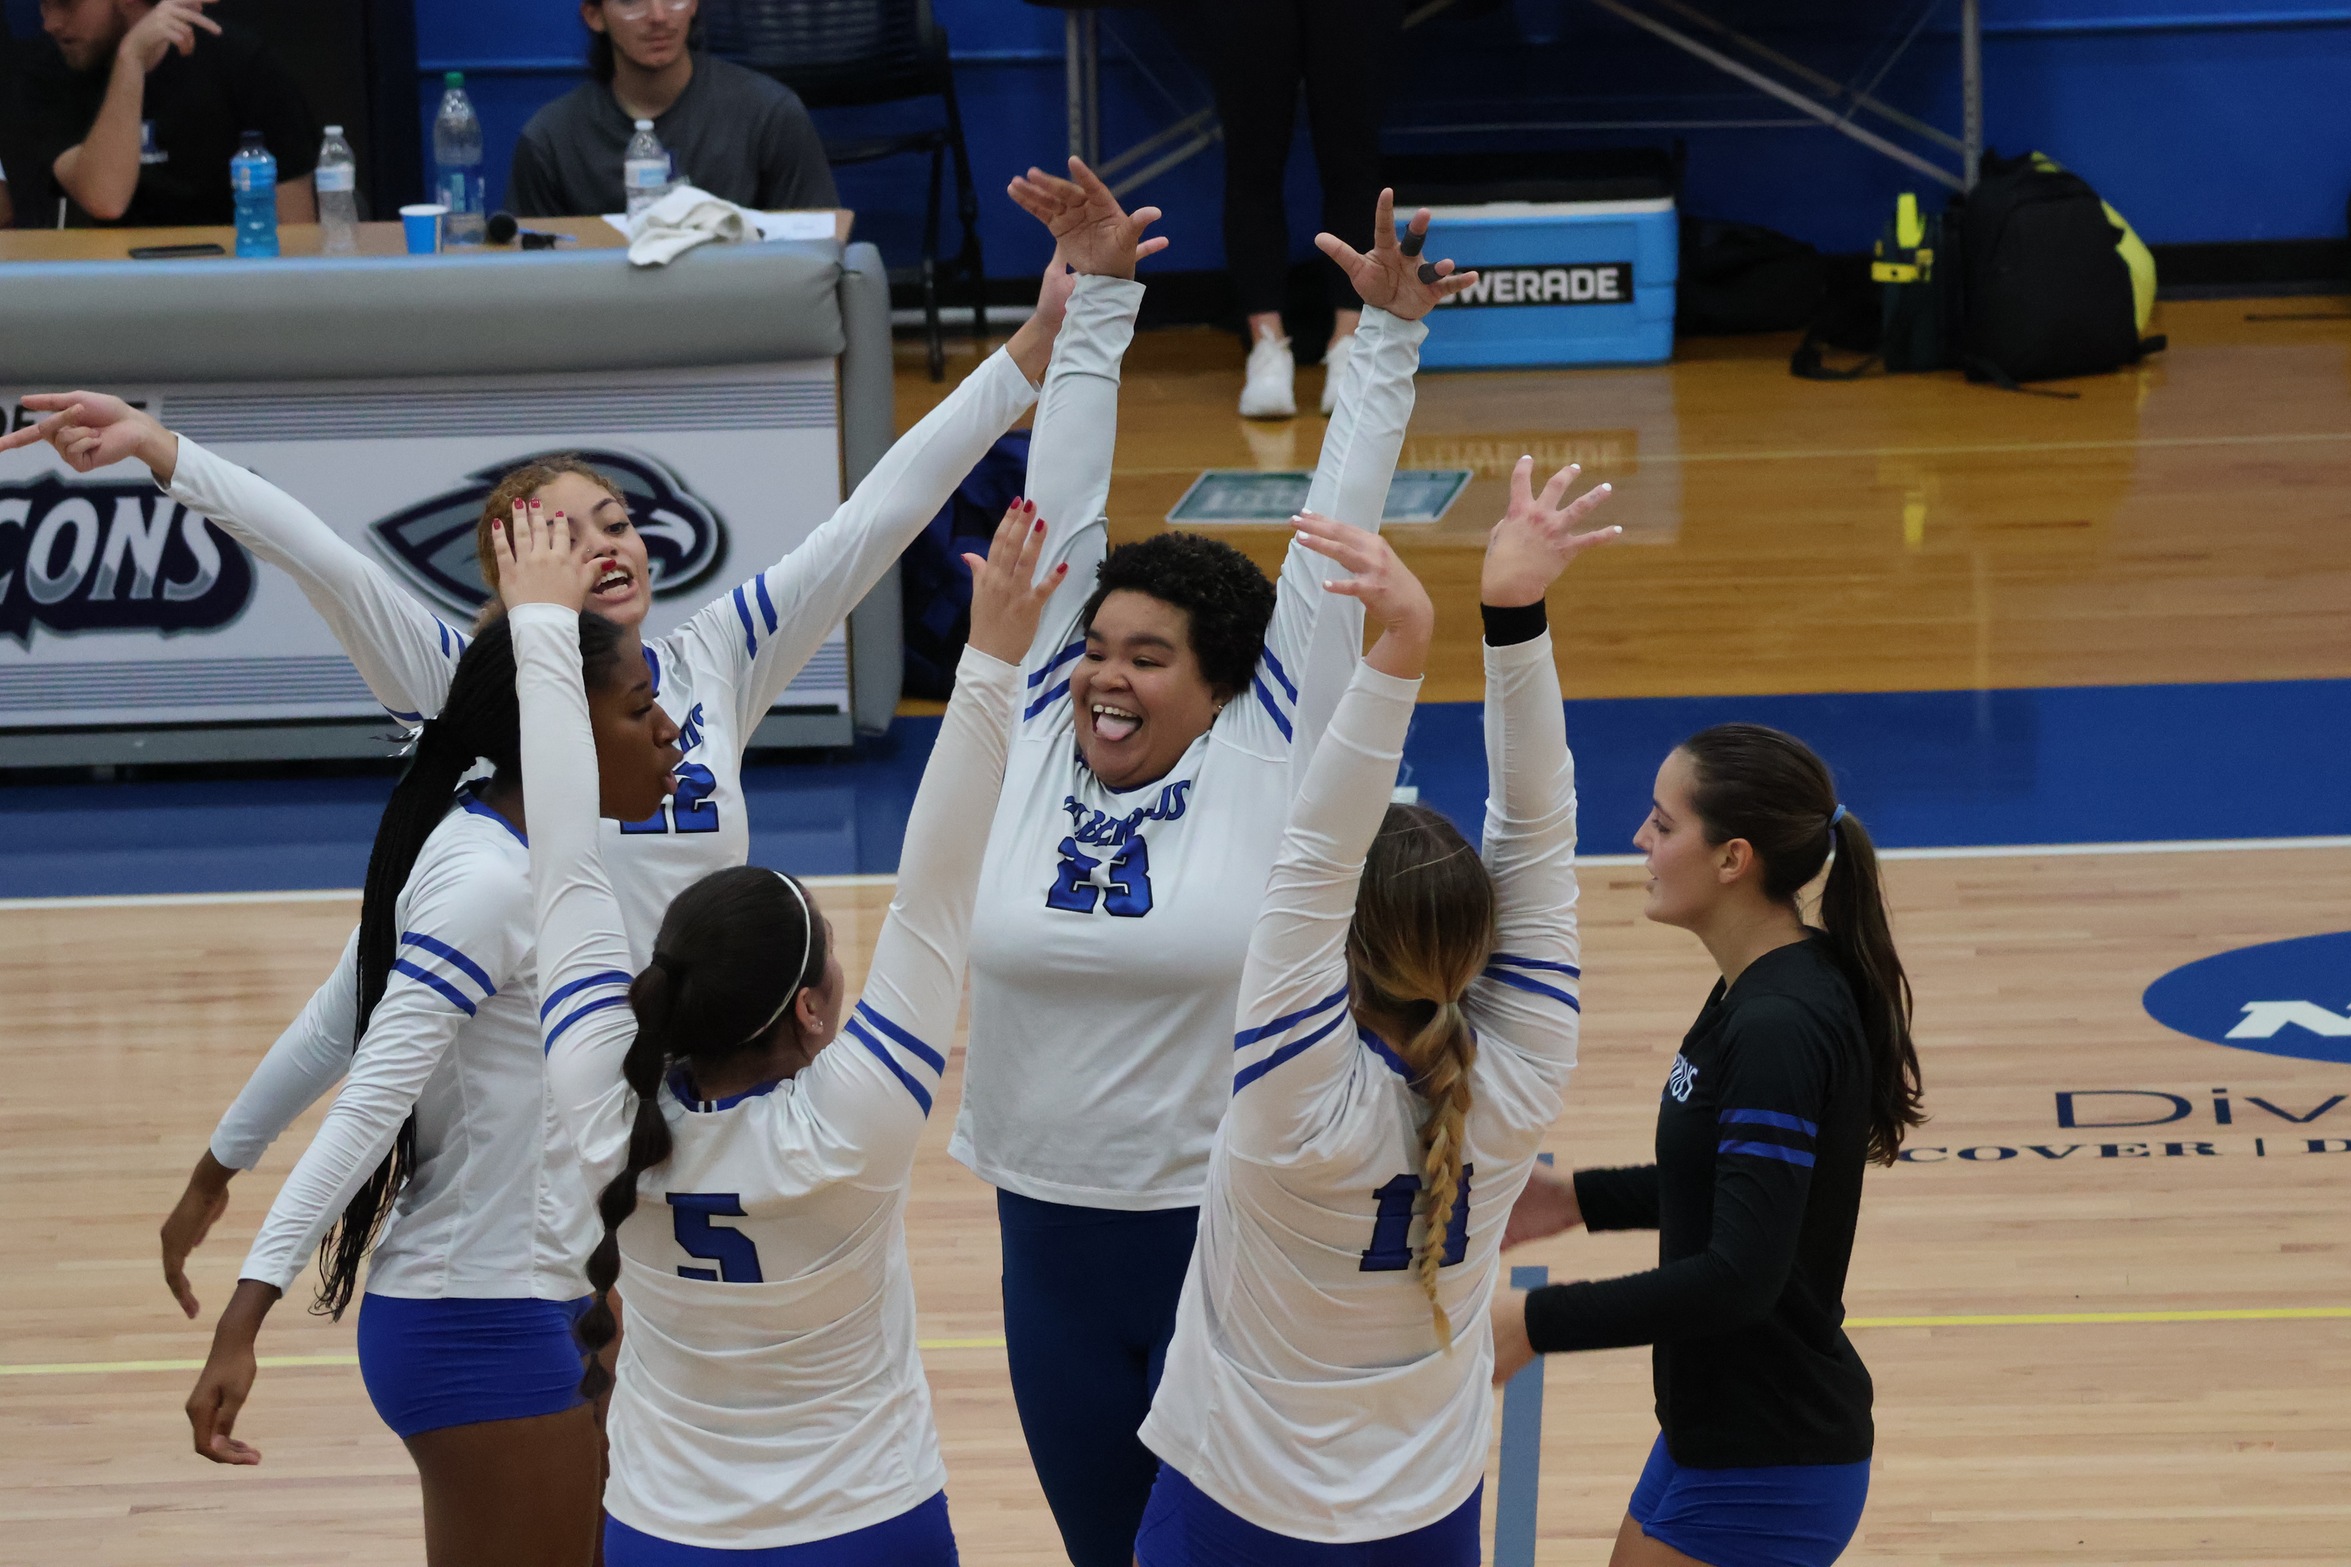 Albertus Volleyball Gets Back In The Win Column, Defeating Fisher In Four Sets